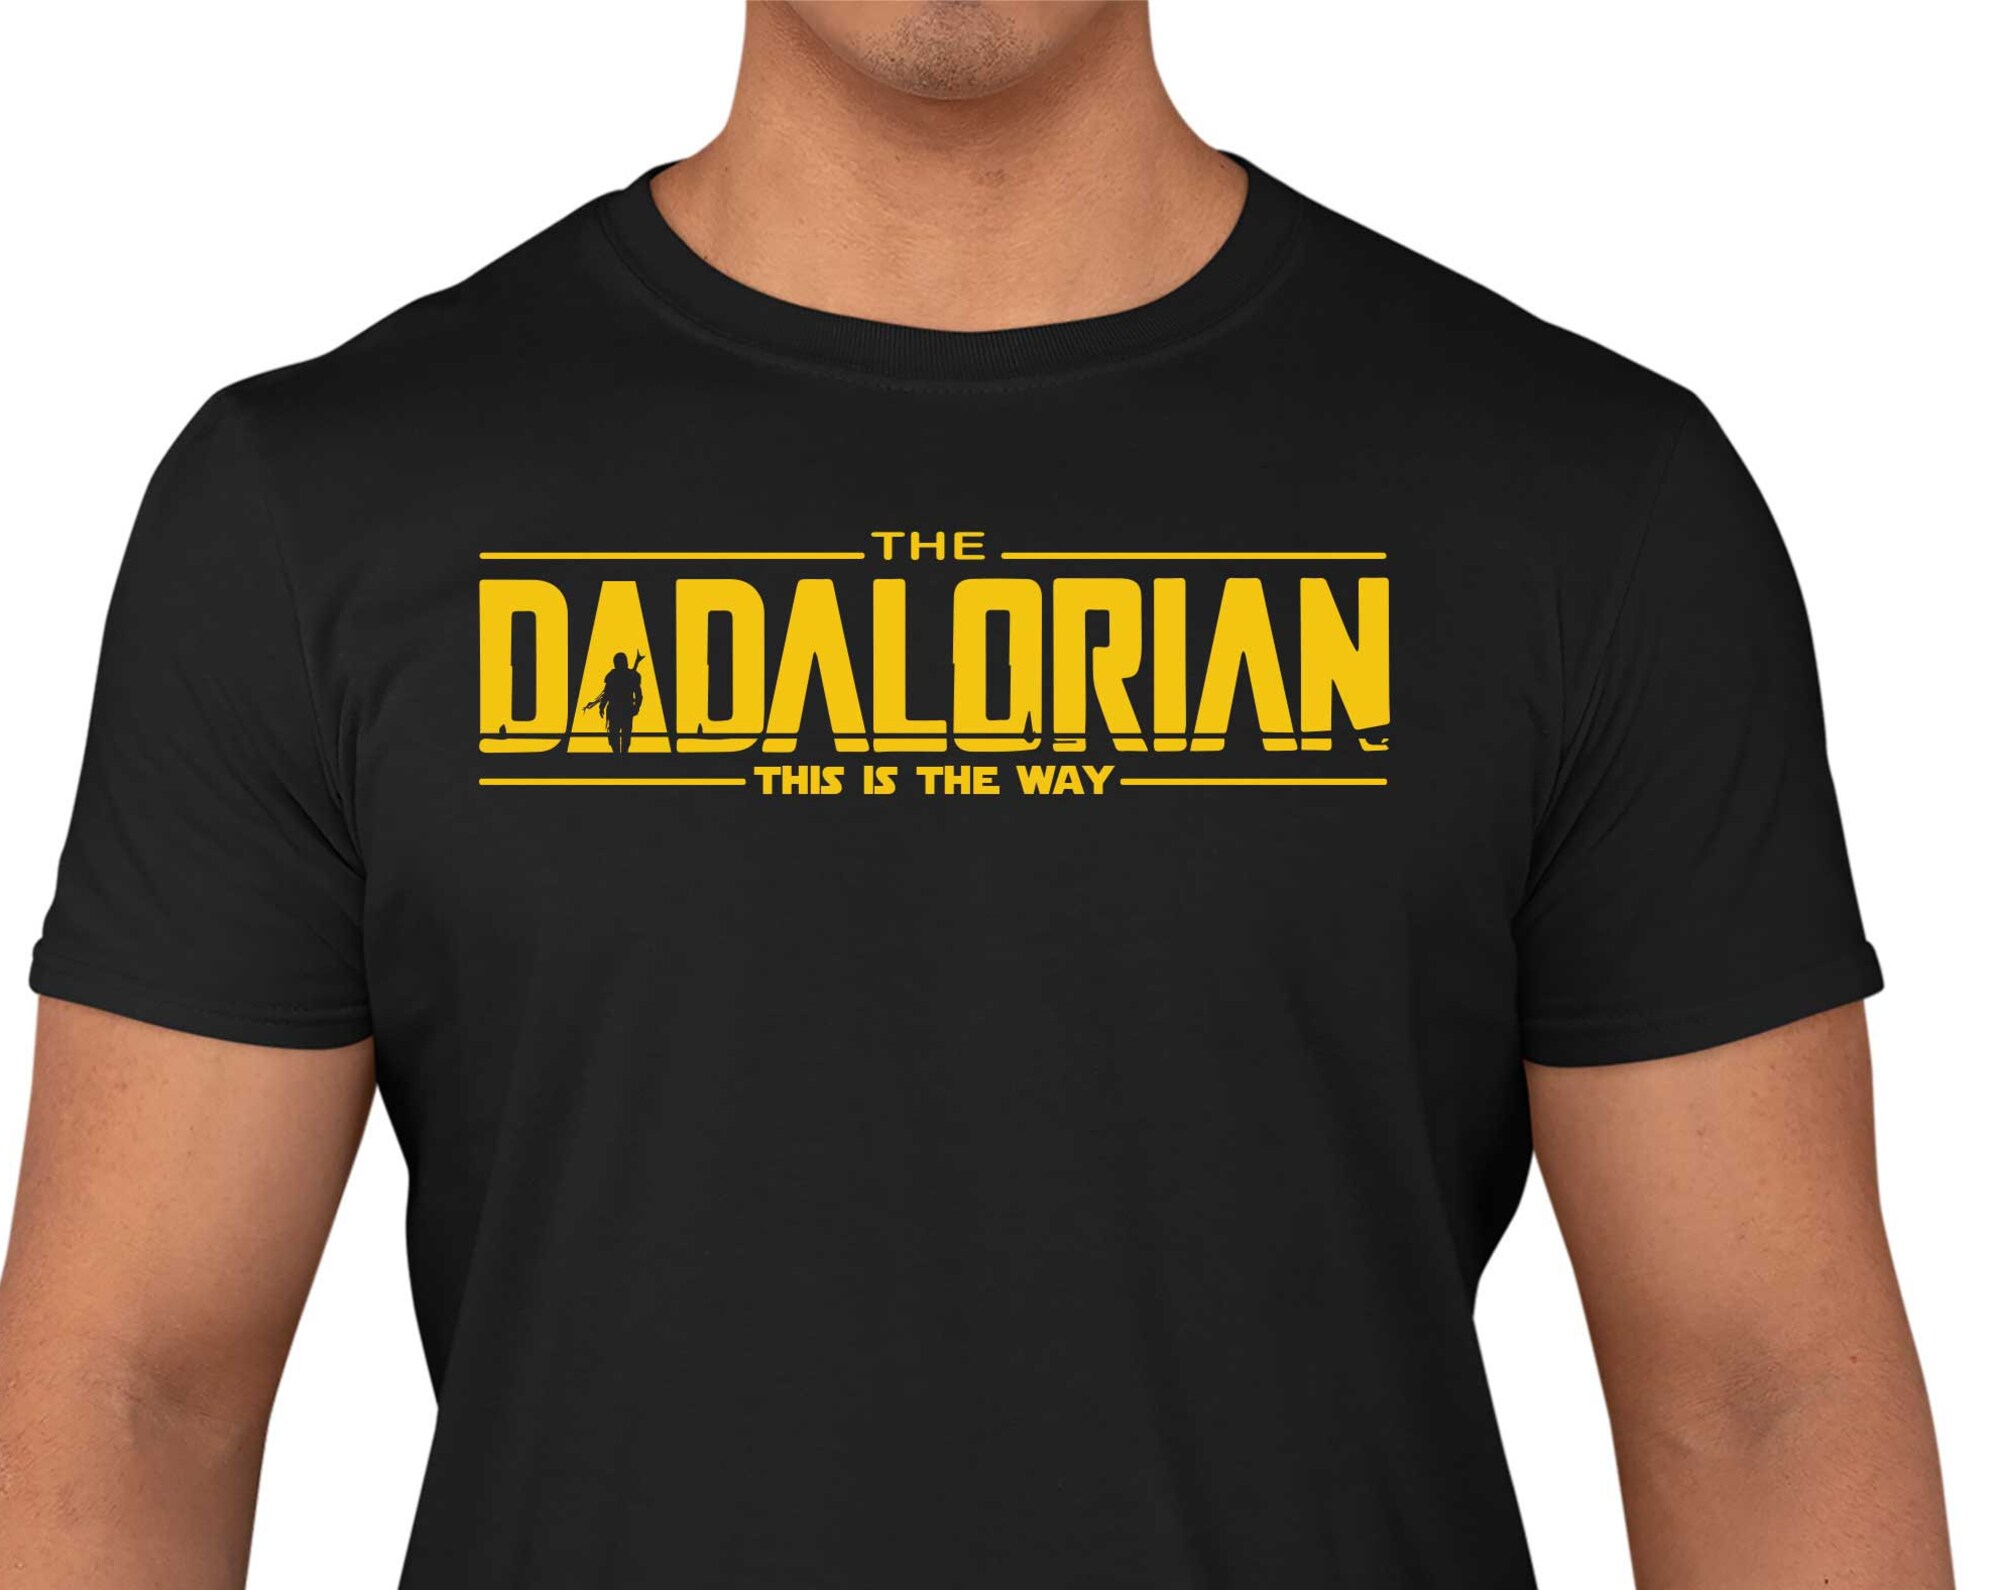 Discover The Dadalorian T-Shirt This Is The Way Men's Fathers Day Gift Tee Shirt Top